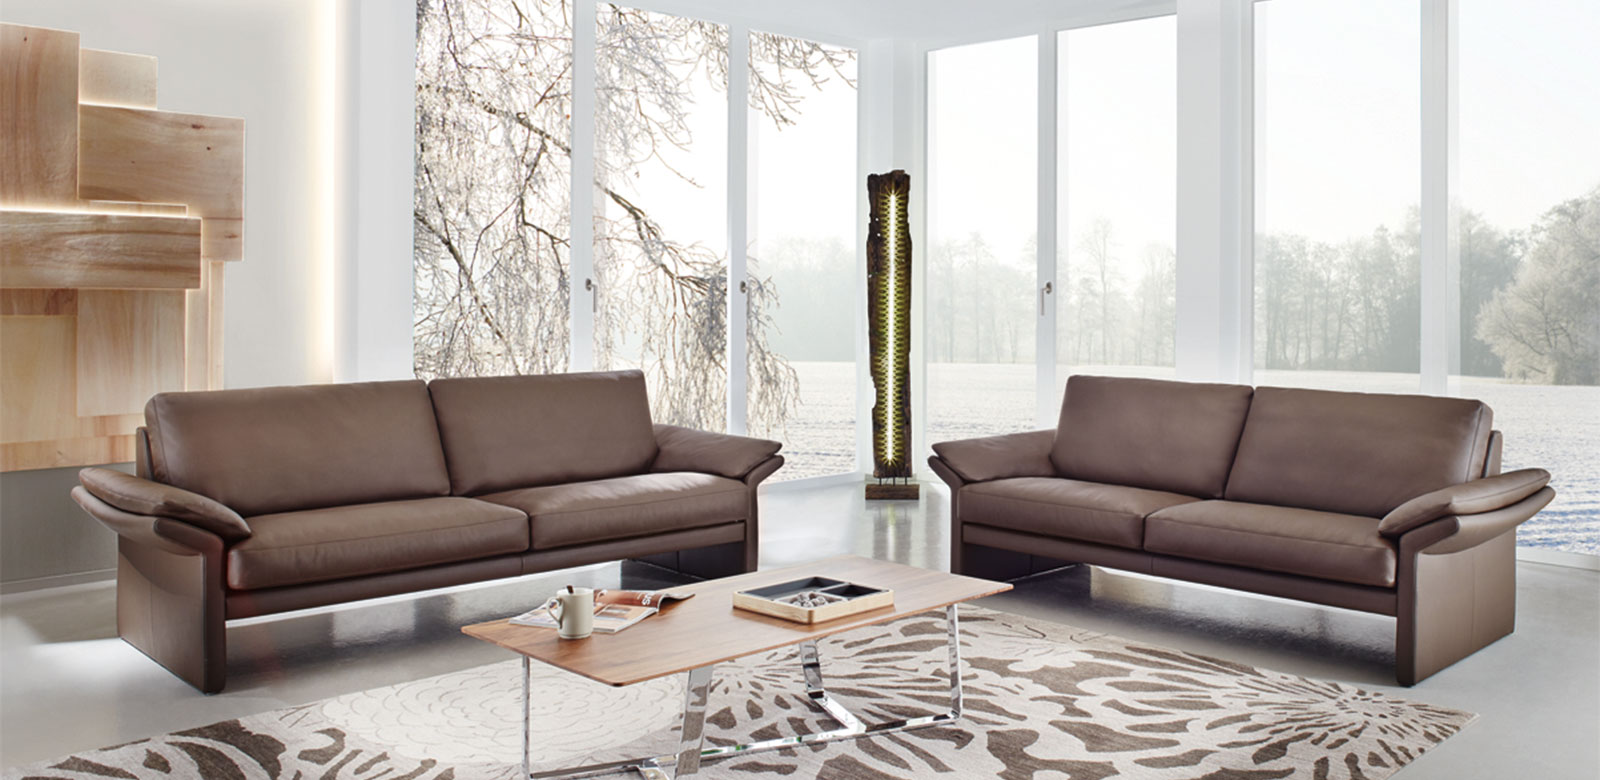 Two CL910 Sofas in brown leather in modern living room and terrace facing the forest